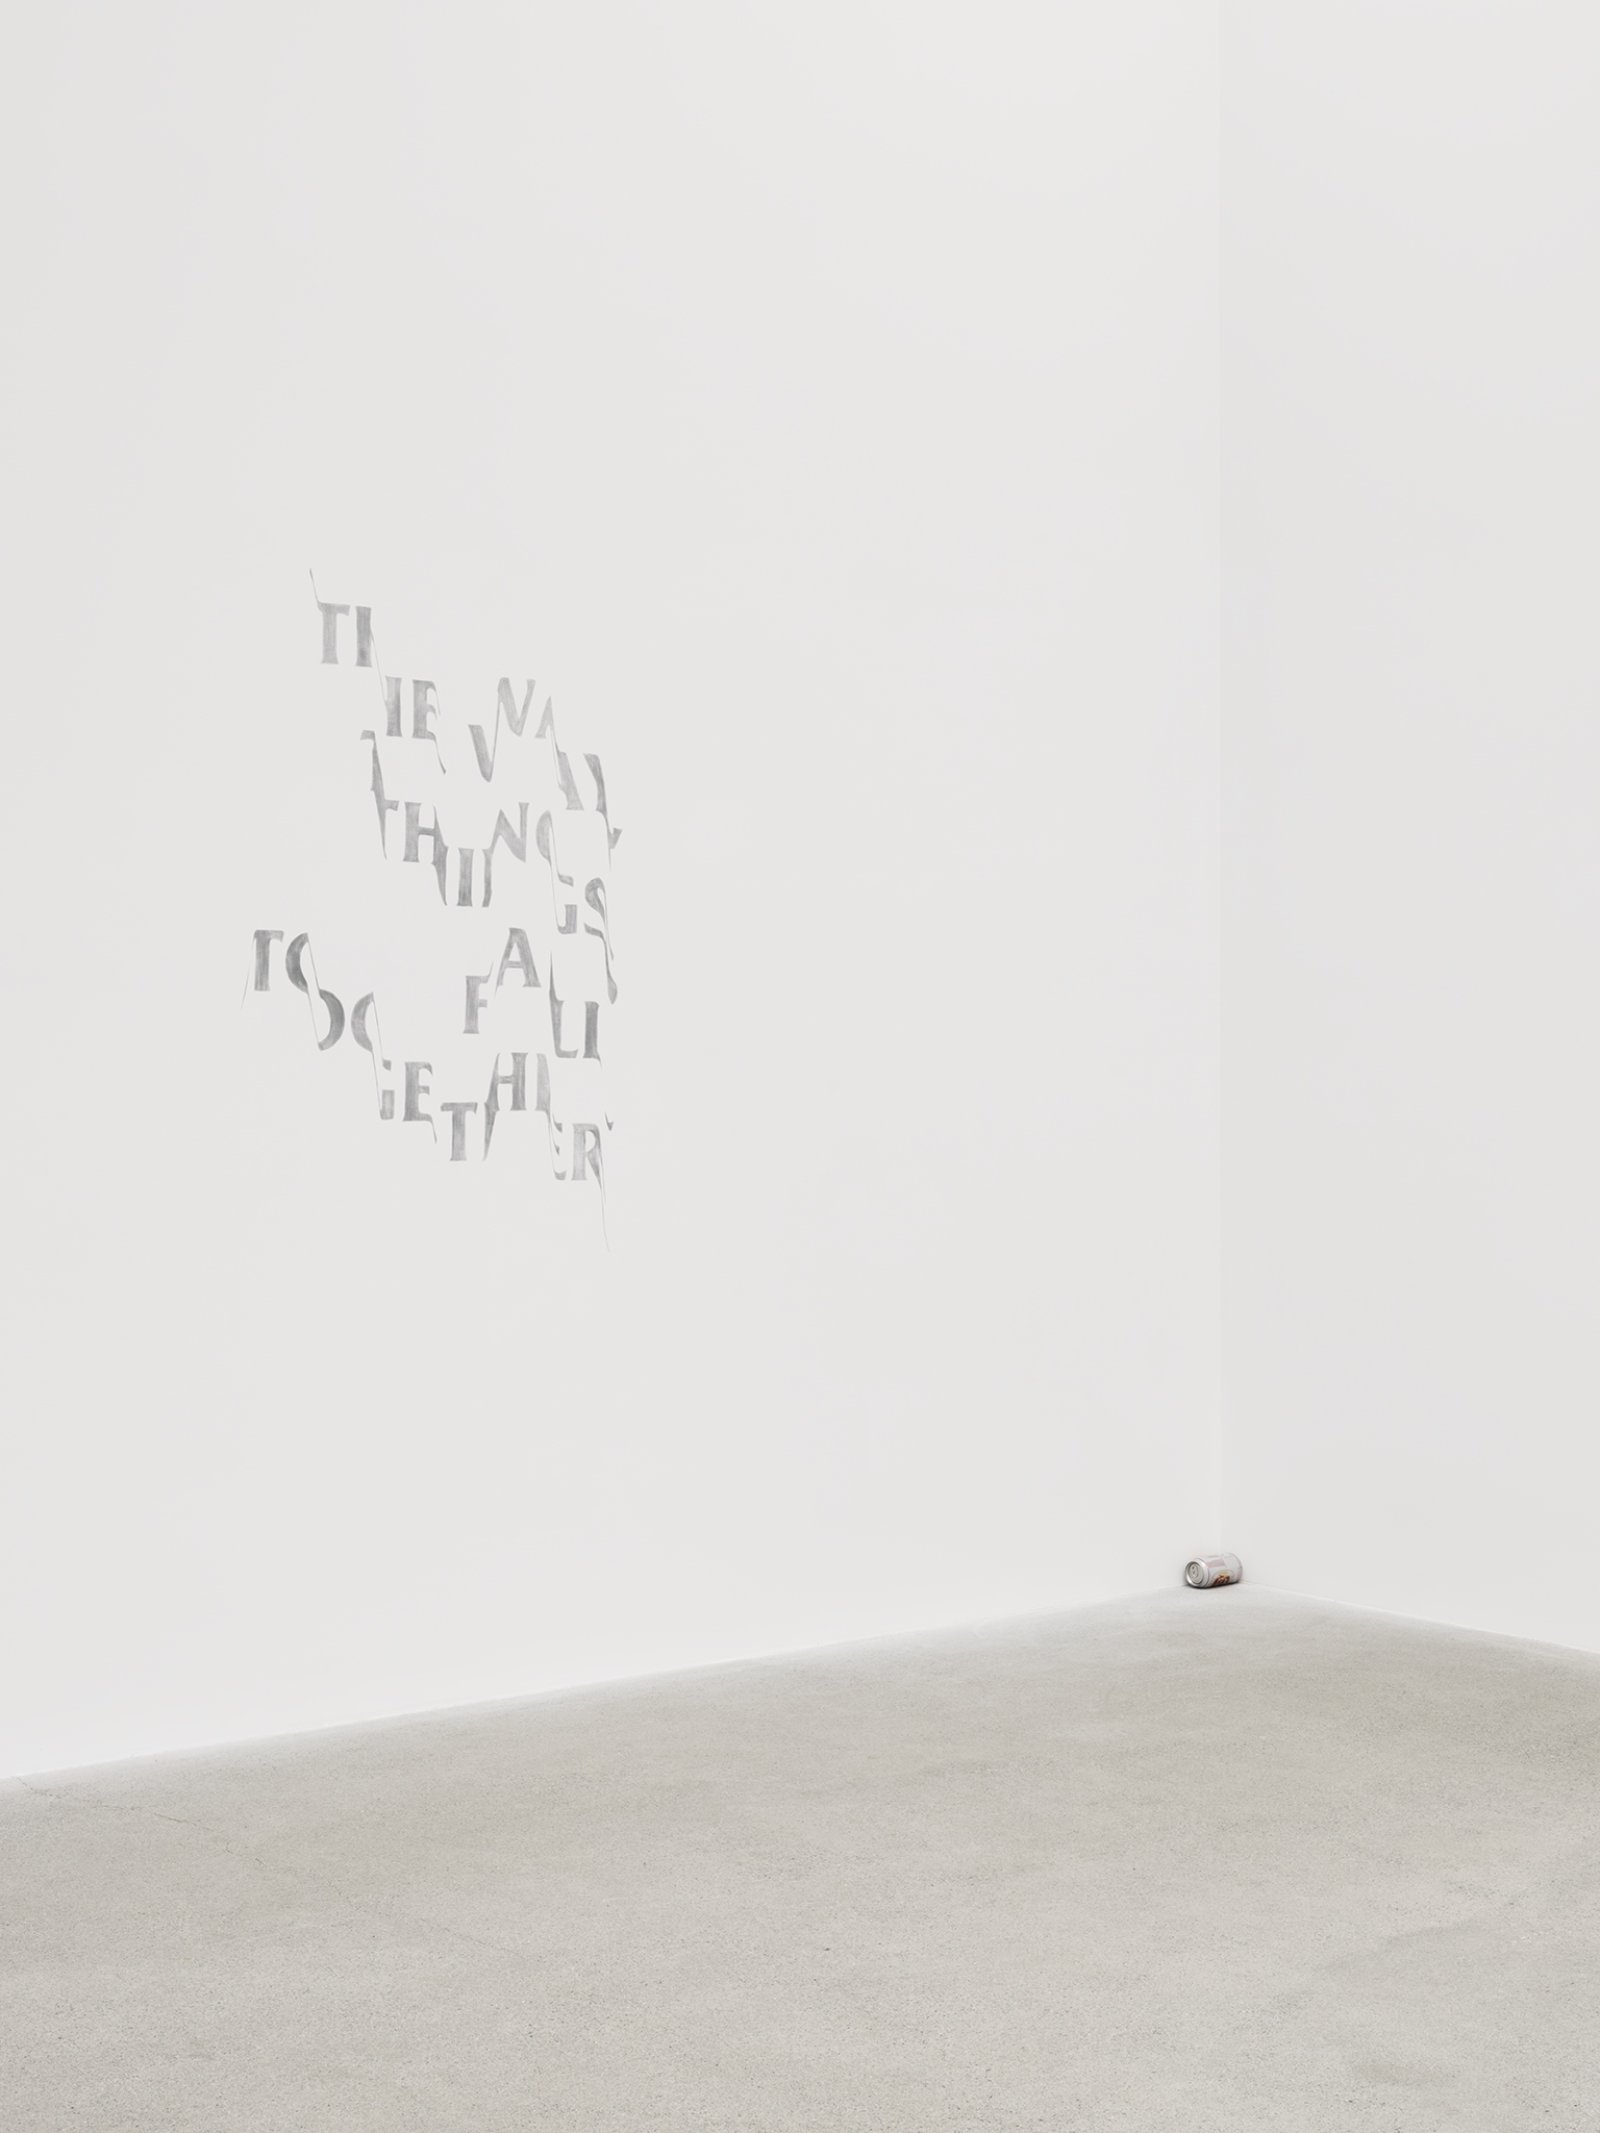 Raymond Boisjoly, Clinamen, 2019, lucky lager beer can on wall, 44 x 31 in. (112 x 79 cm)